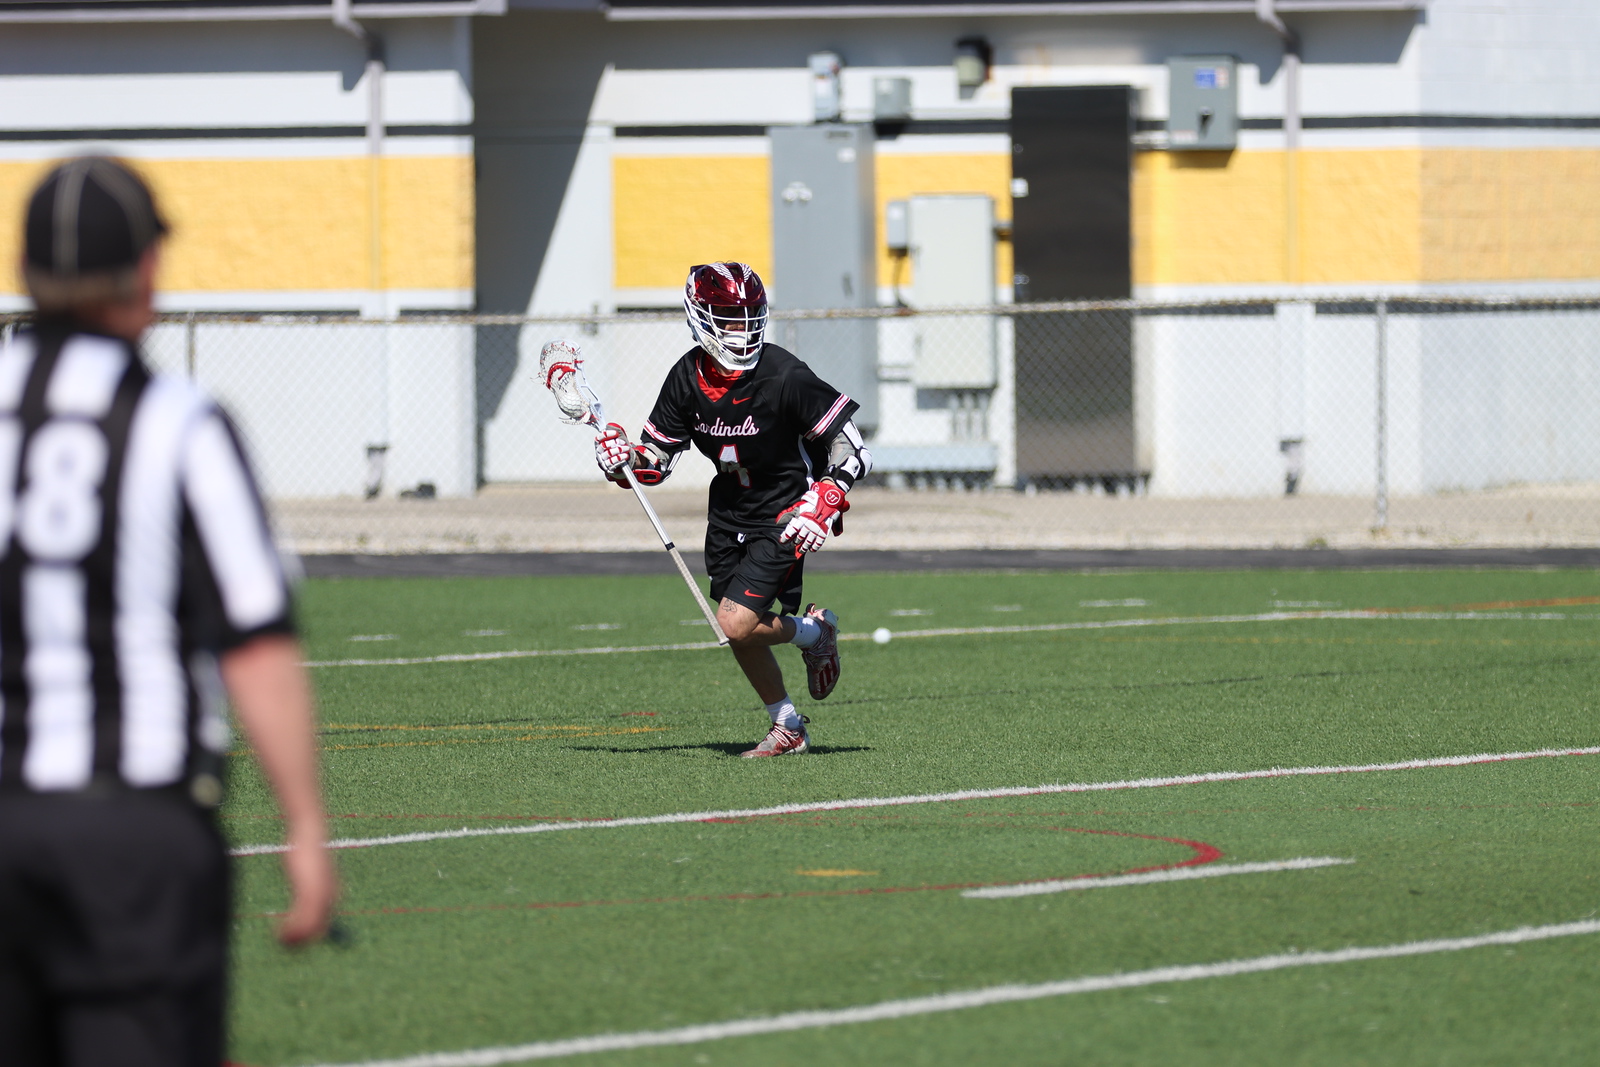 Men's Lacrosse extends win streak to 11 with victory over UM-Dearborn